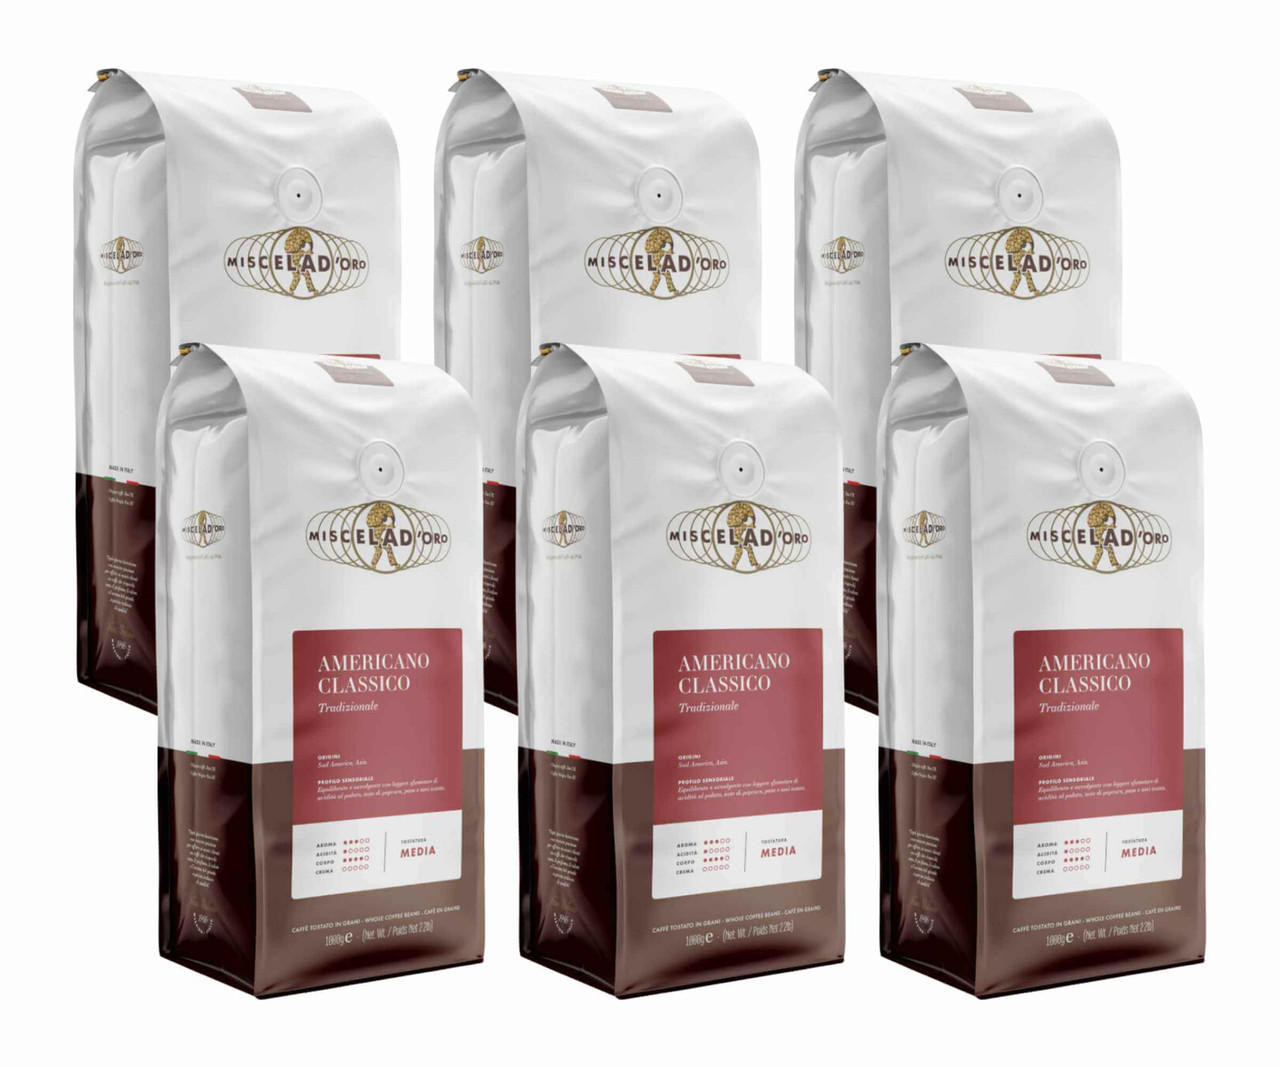  Miscela D'Oro AMERICANO CLASSICO Strong Coffee Beans 1 Kg / 2.2 lbs (6/Case) 